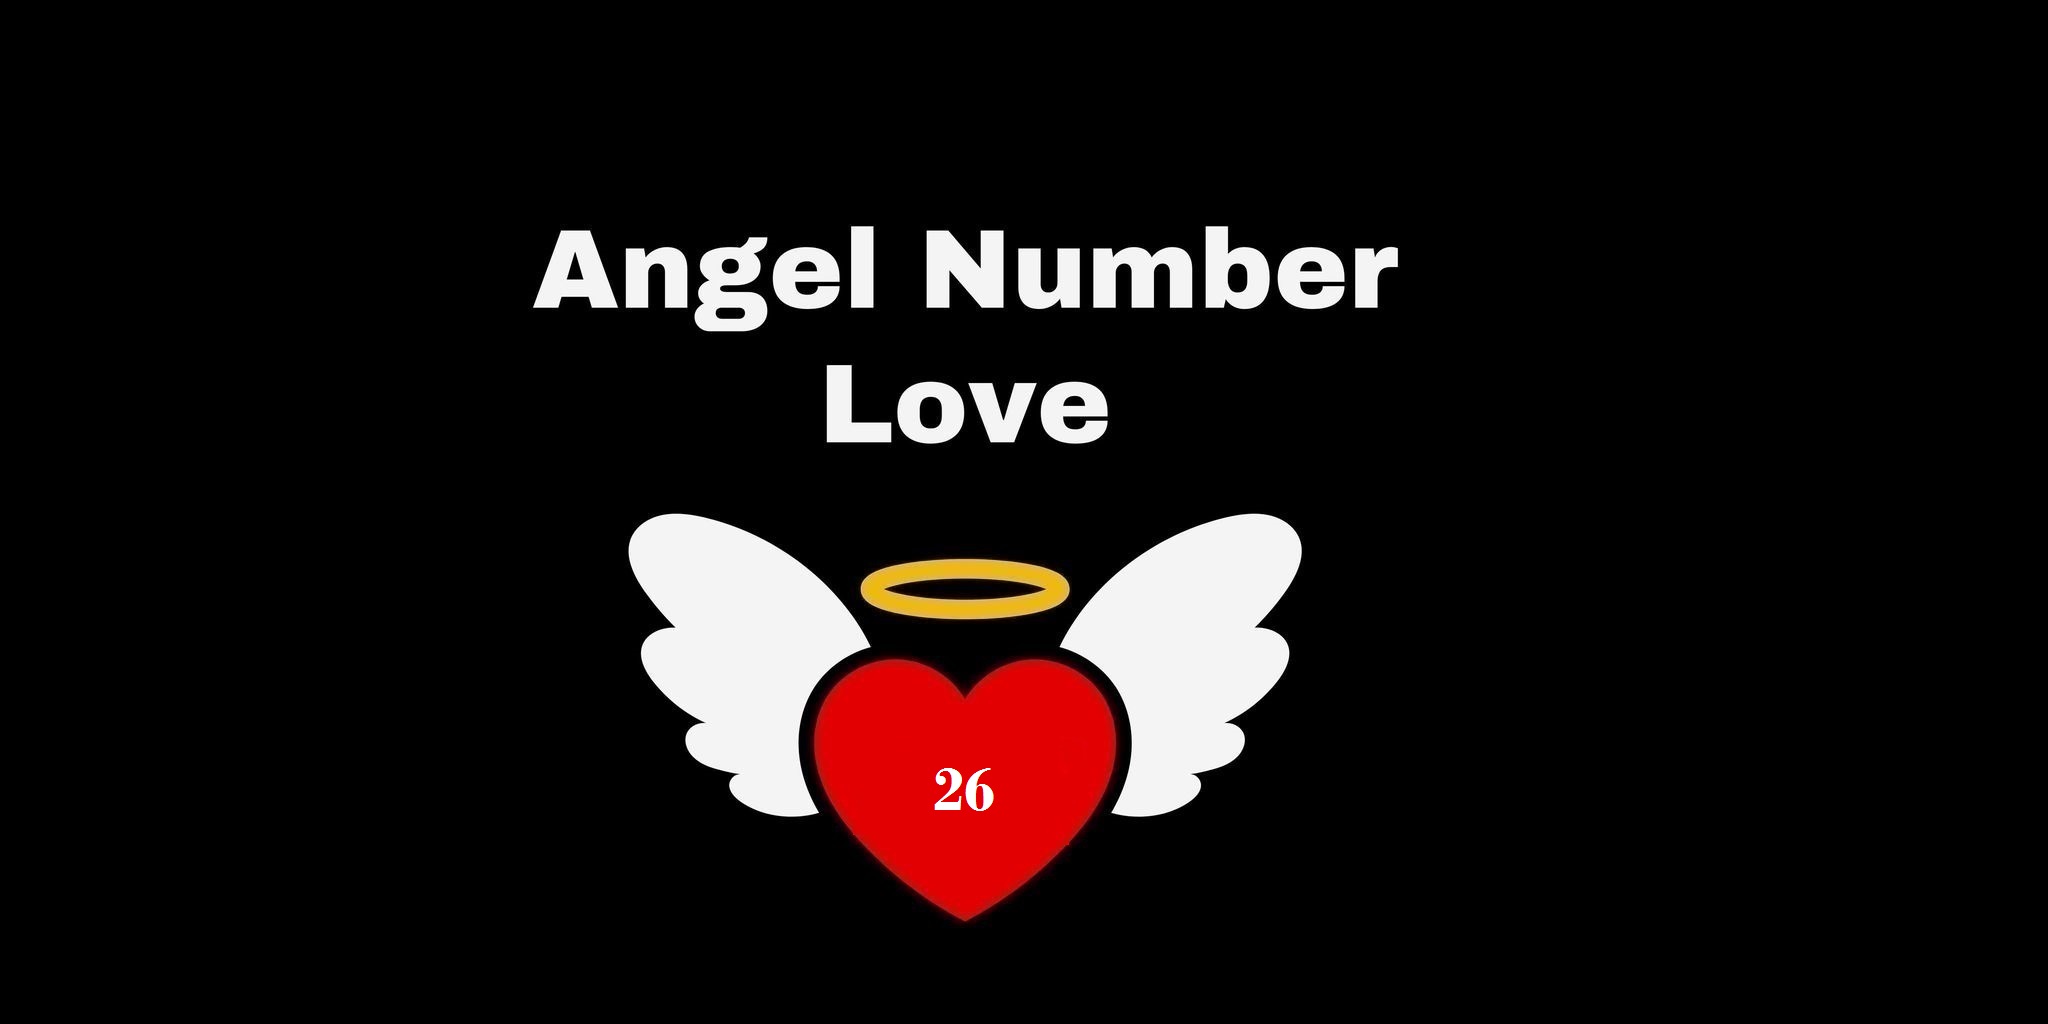 26 Angel Number Meaning In Love